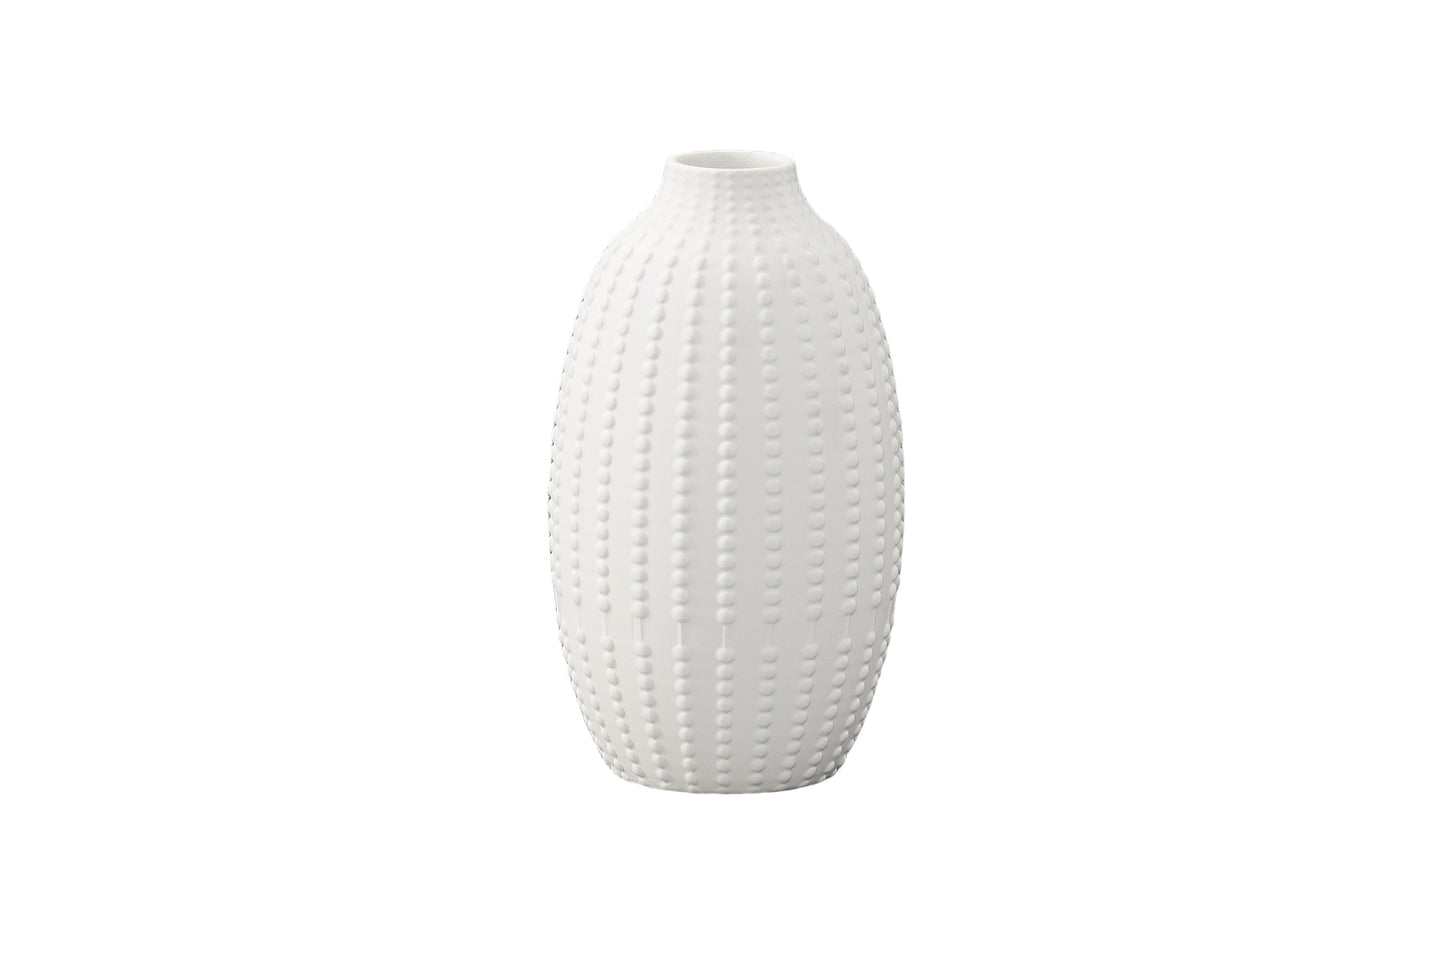 Ceramic Round Bellied Vase with Embossed Dotted Column Pattern Design